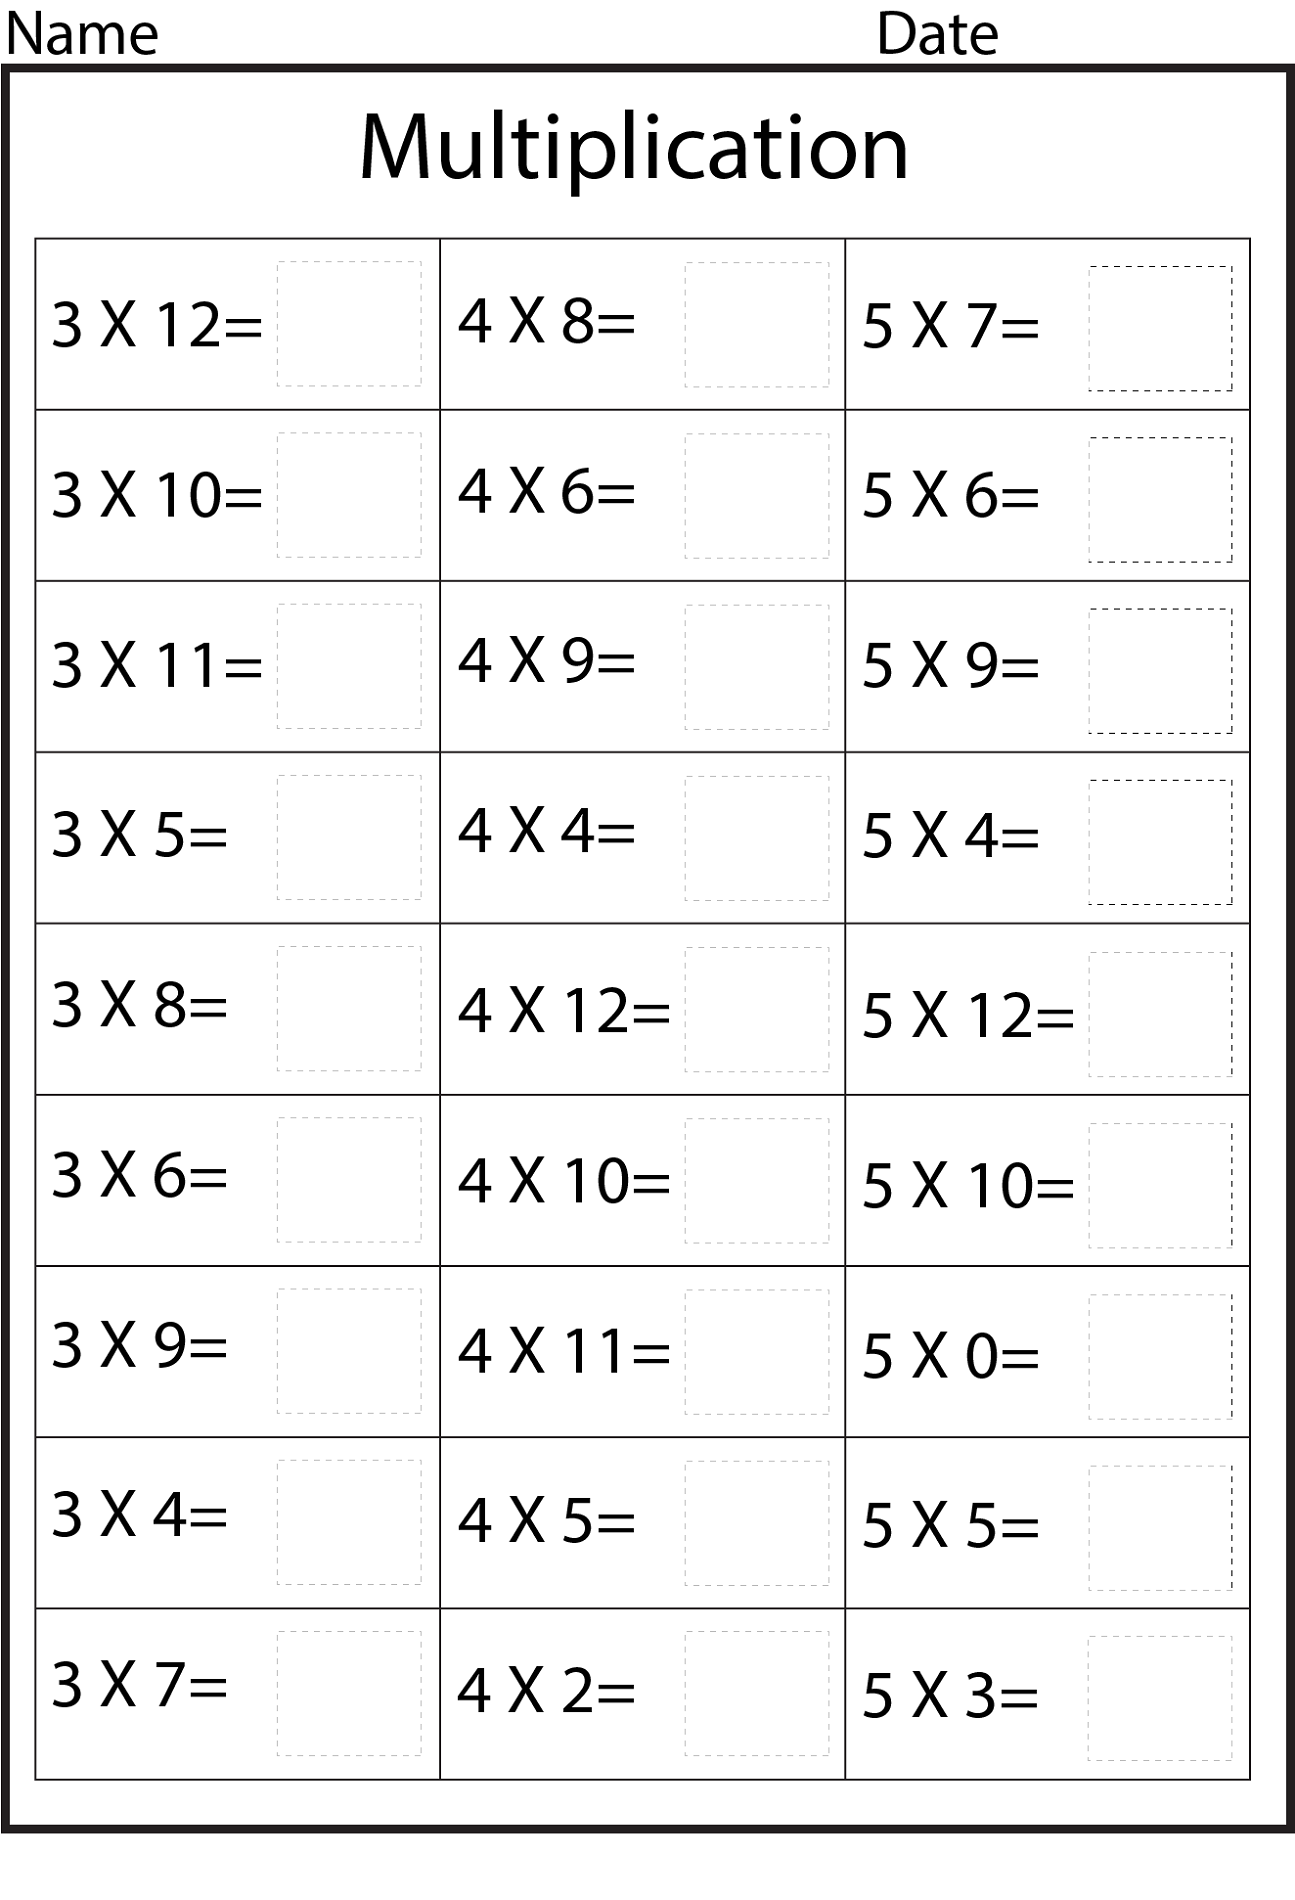 3 times tables worksheets exercise